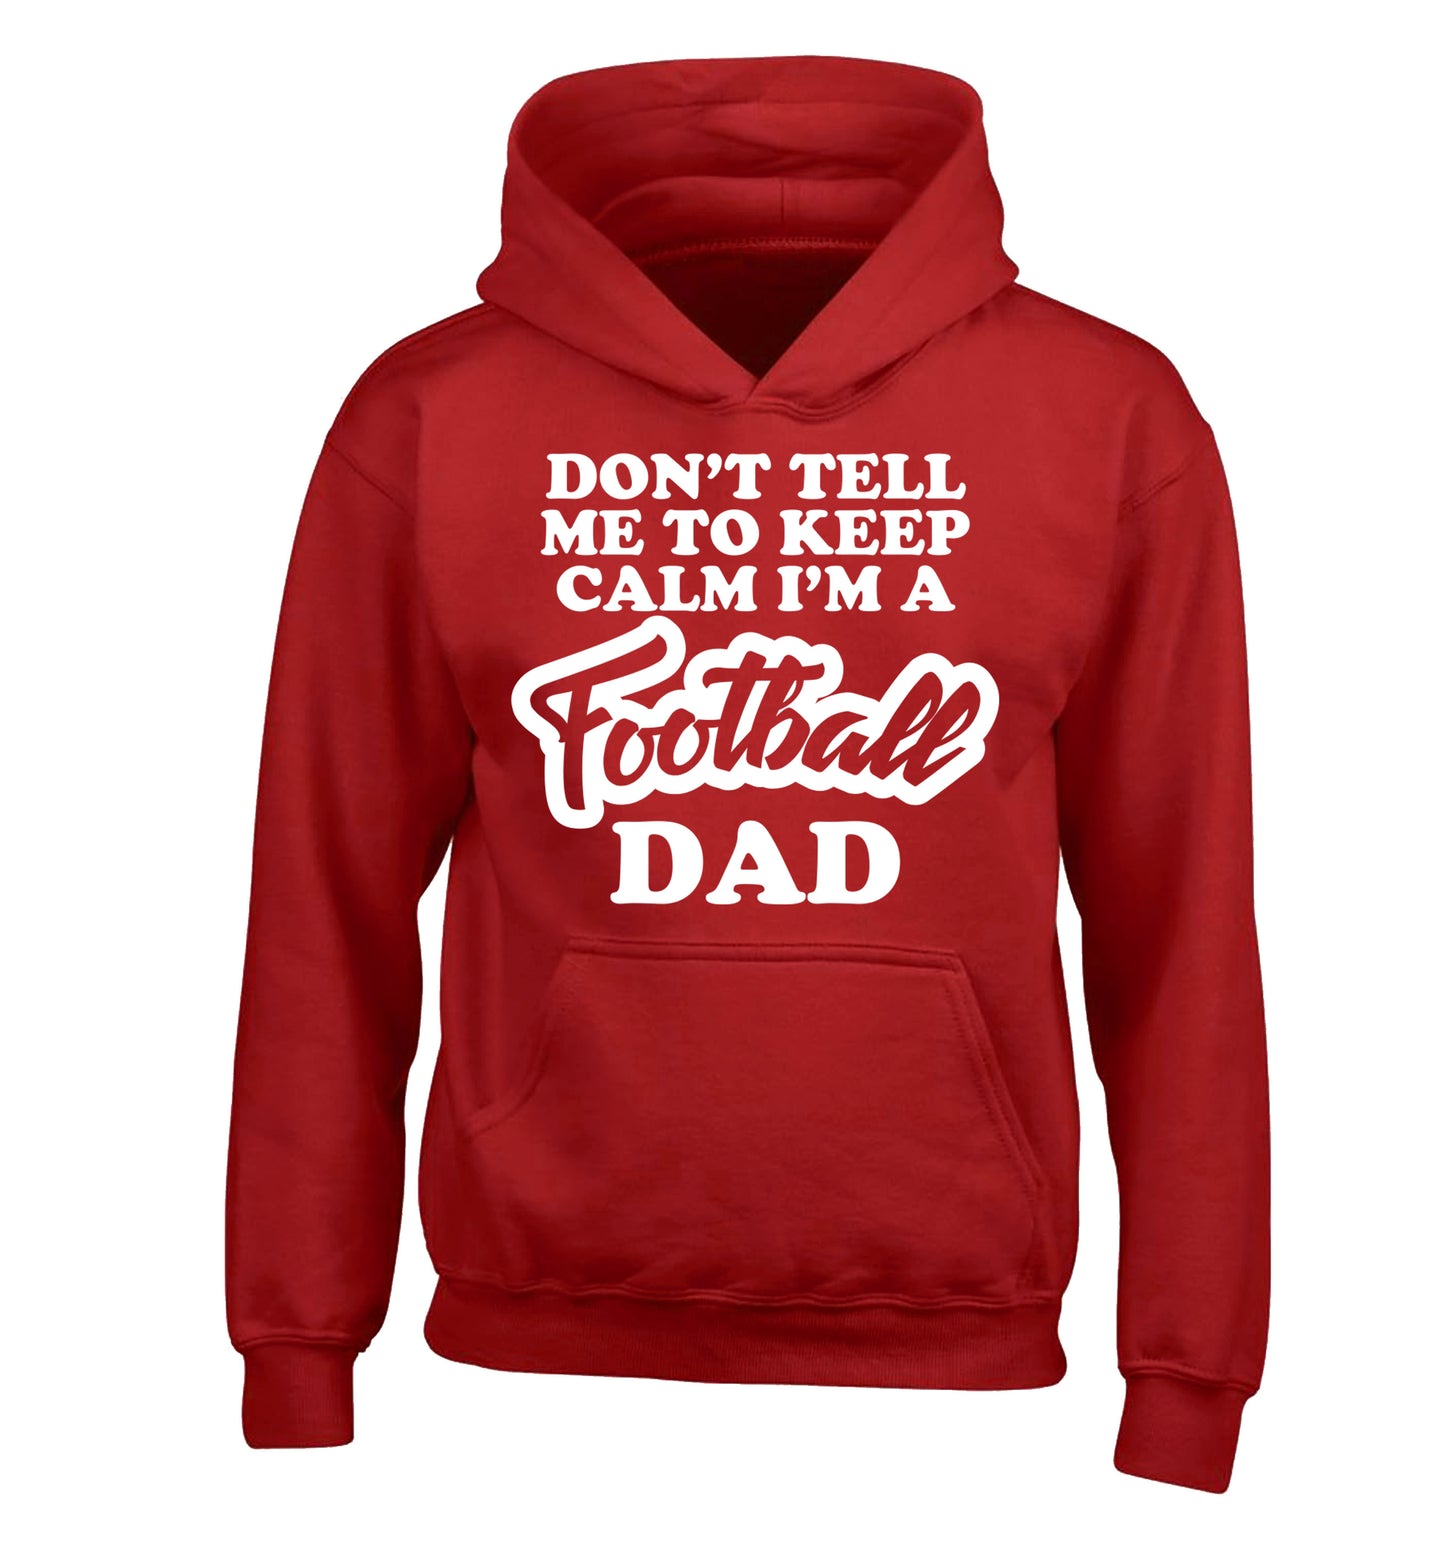 Don't tell me to keep calm I'm a football dad children's red hoodie 12-14 Years